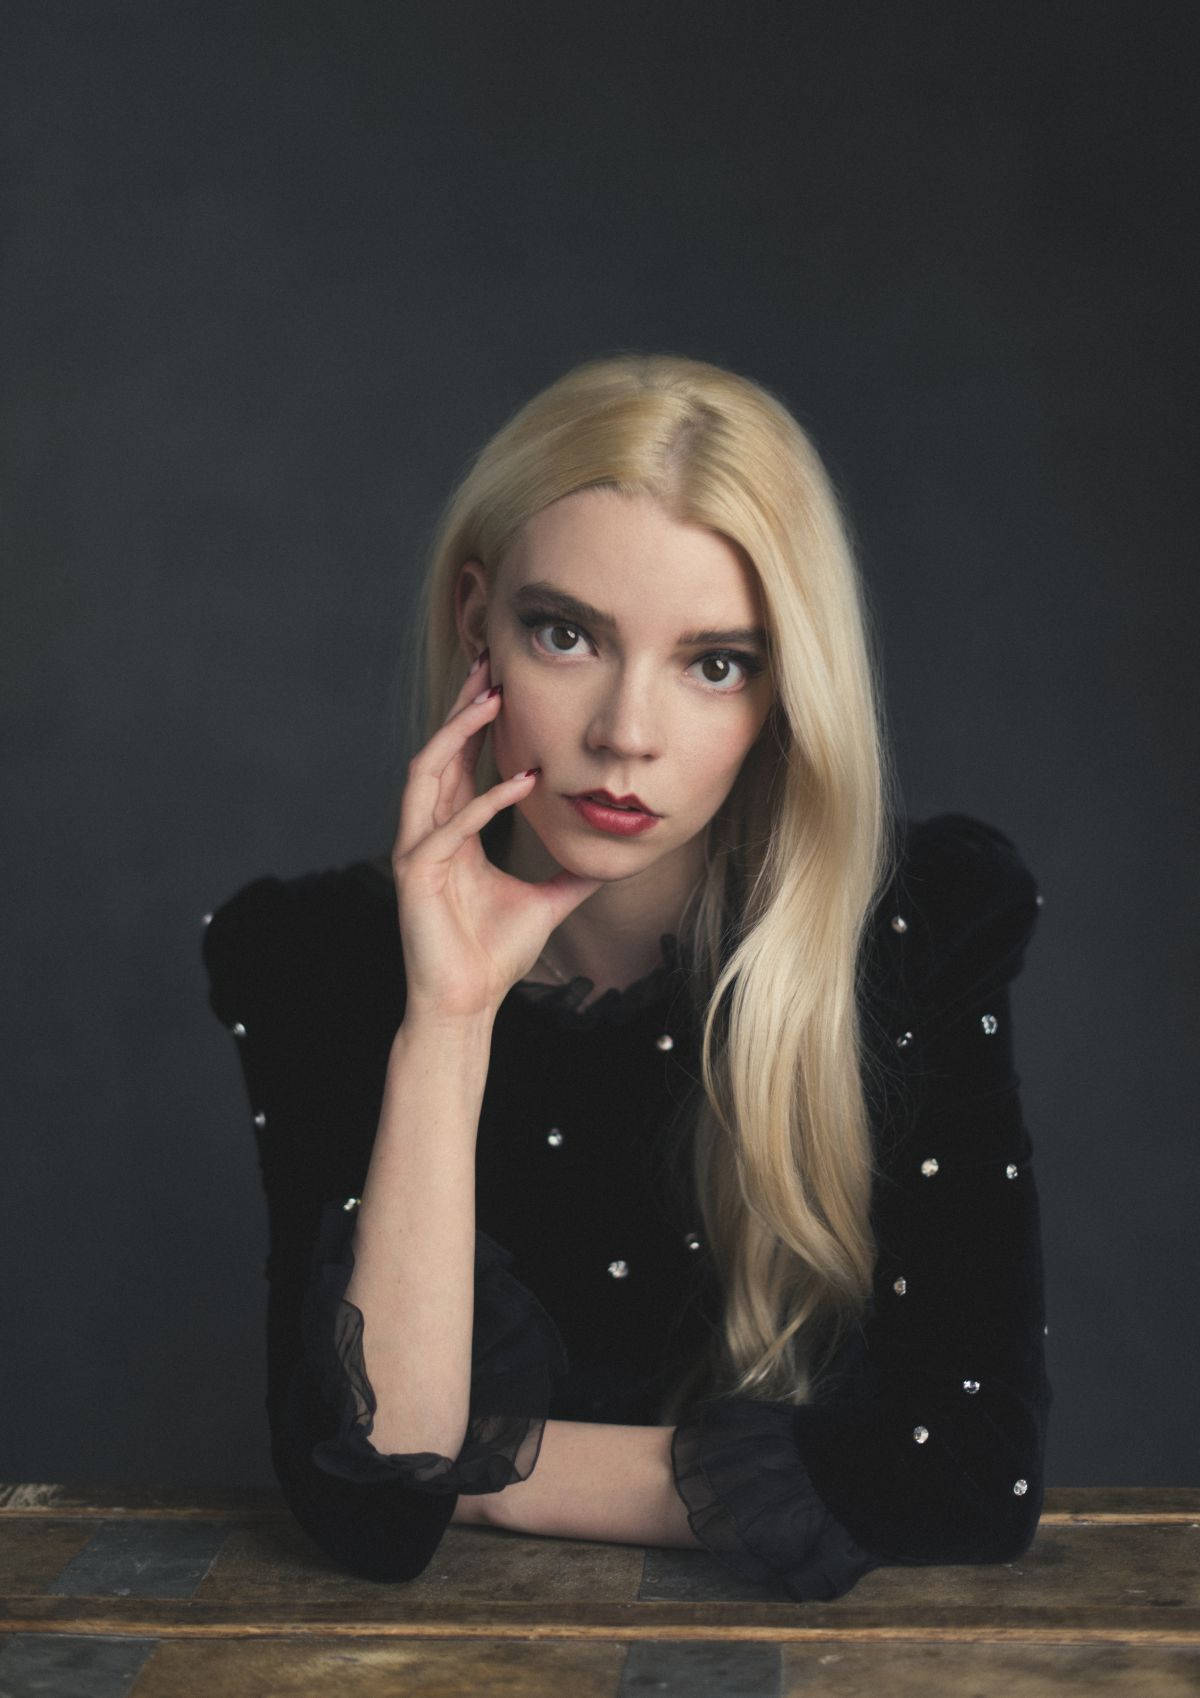 A blonde woman in a black top sits at a wooden table. - Anya Taylor-Joy